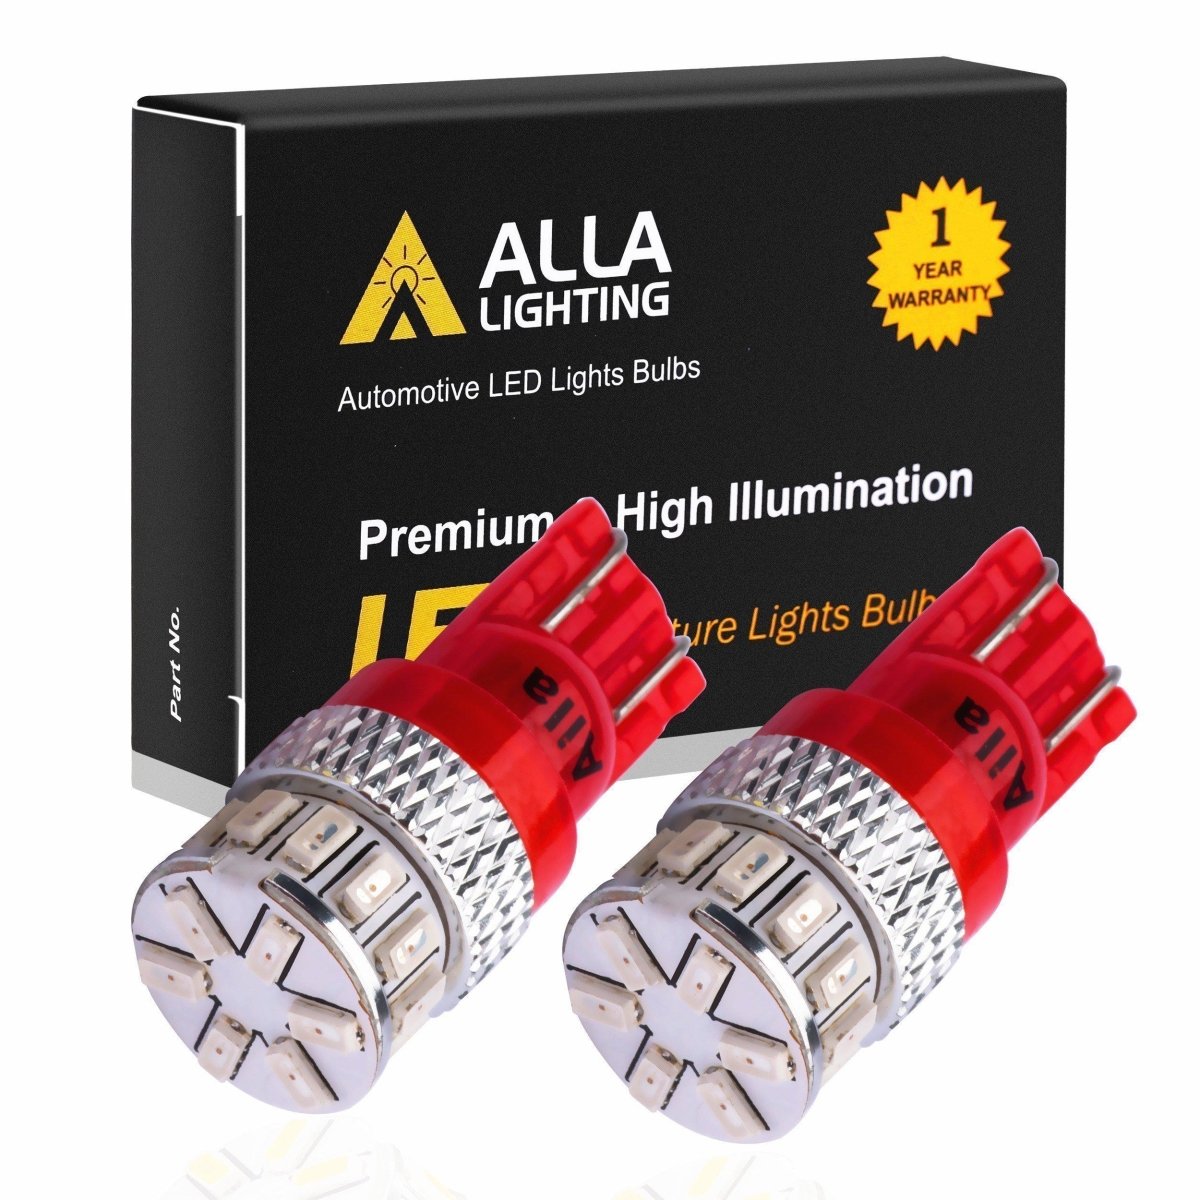 Ford Explorer License Plate Lights Bulbs LED Tag Lamps Replacement -Alla Lighting